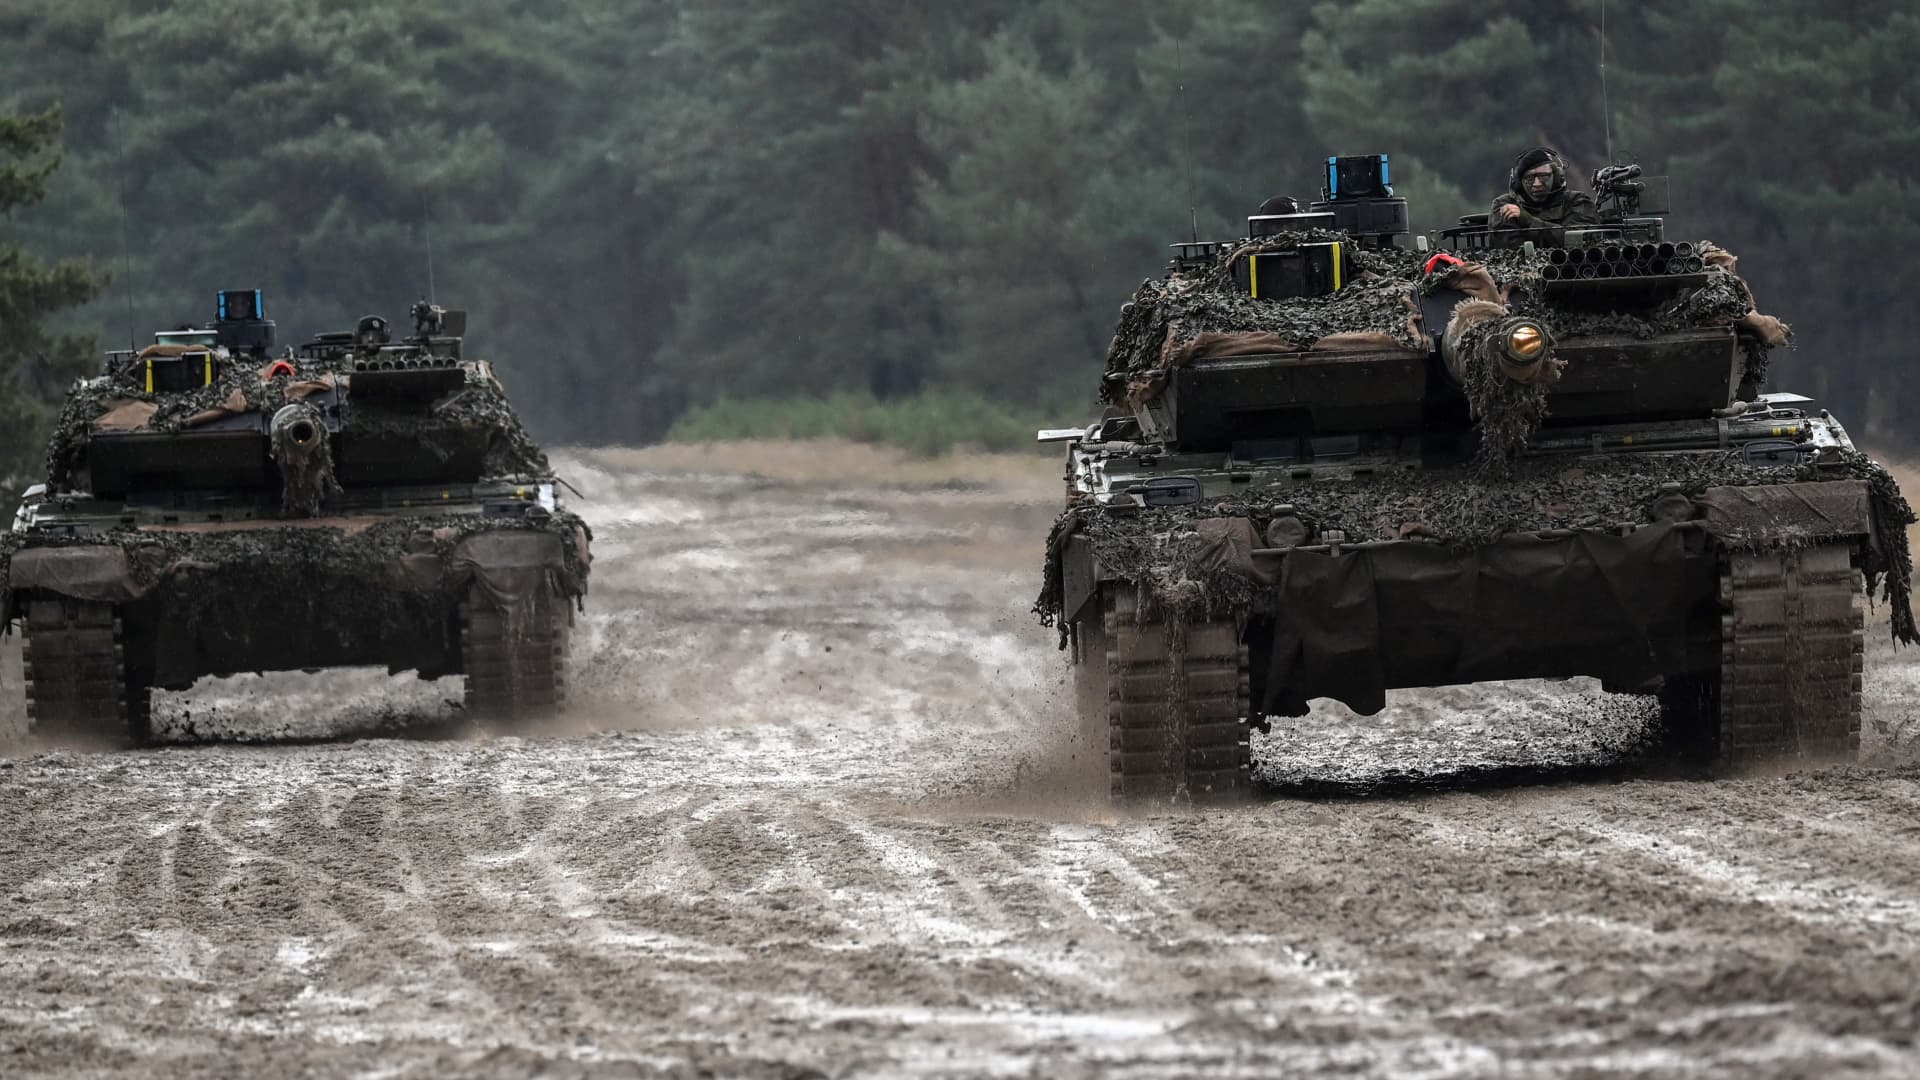 Two Leopard 2 A6 tanks from the German Army's Tank Battalion 203 drive around the training area.